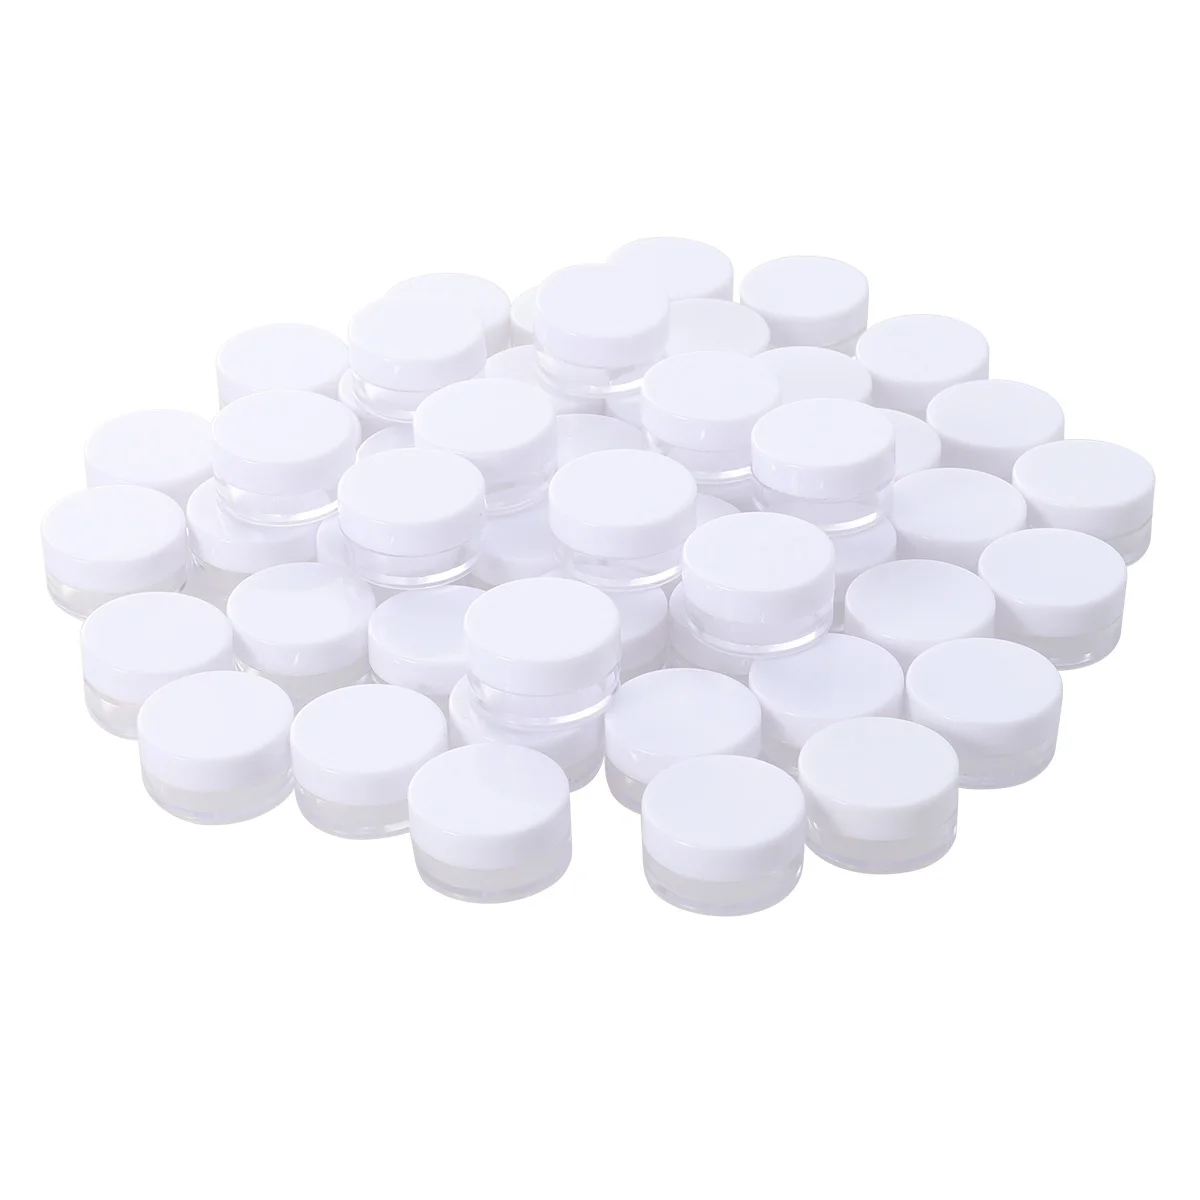 

50pcs 5G Empty Round Clear Jars Jars Lotions Container Powdered Eyeshadow Case Powder Box for Makeup Lotion Creams Eyeshadow